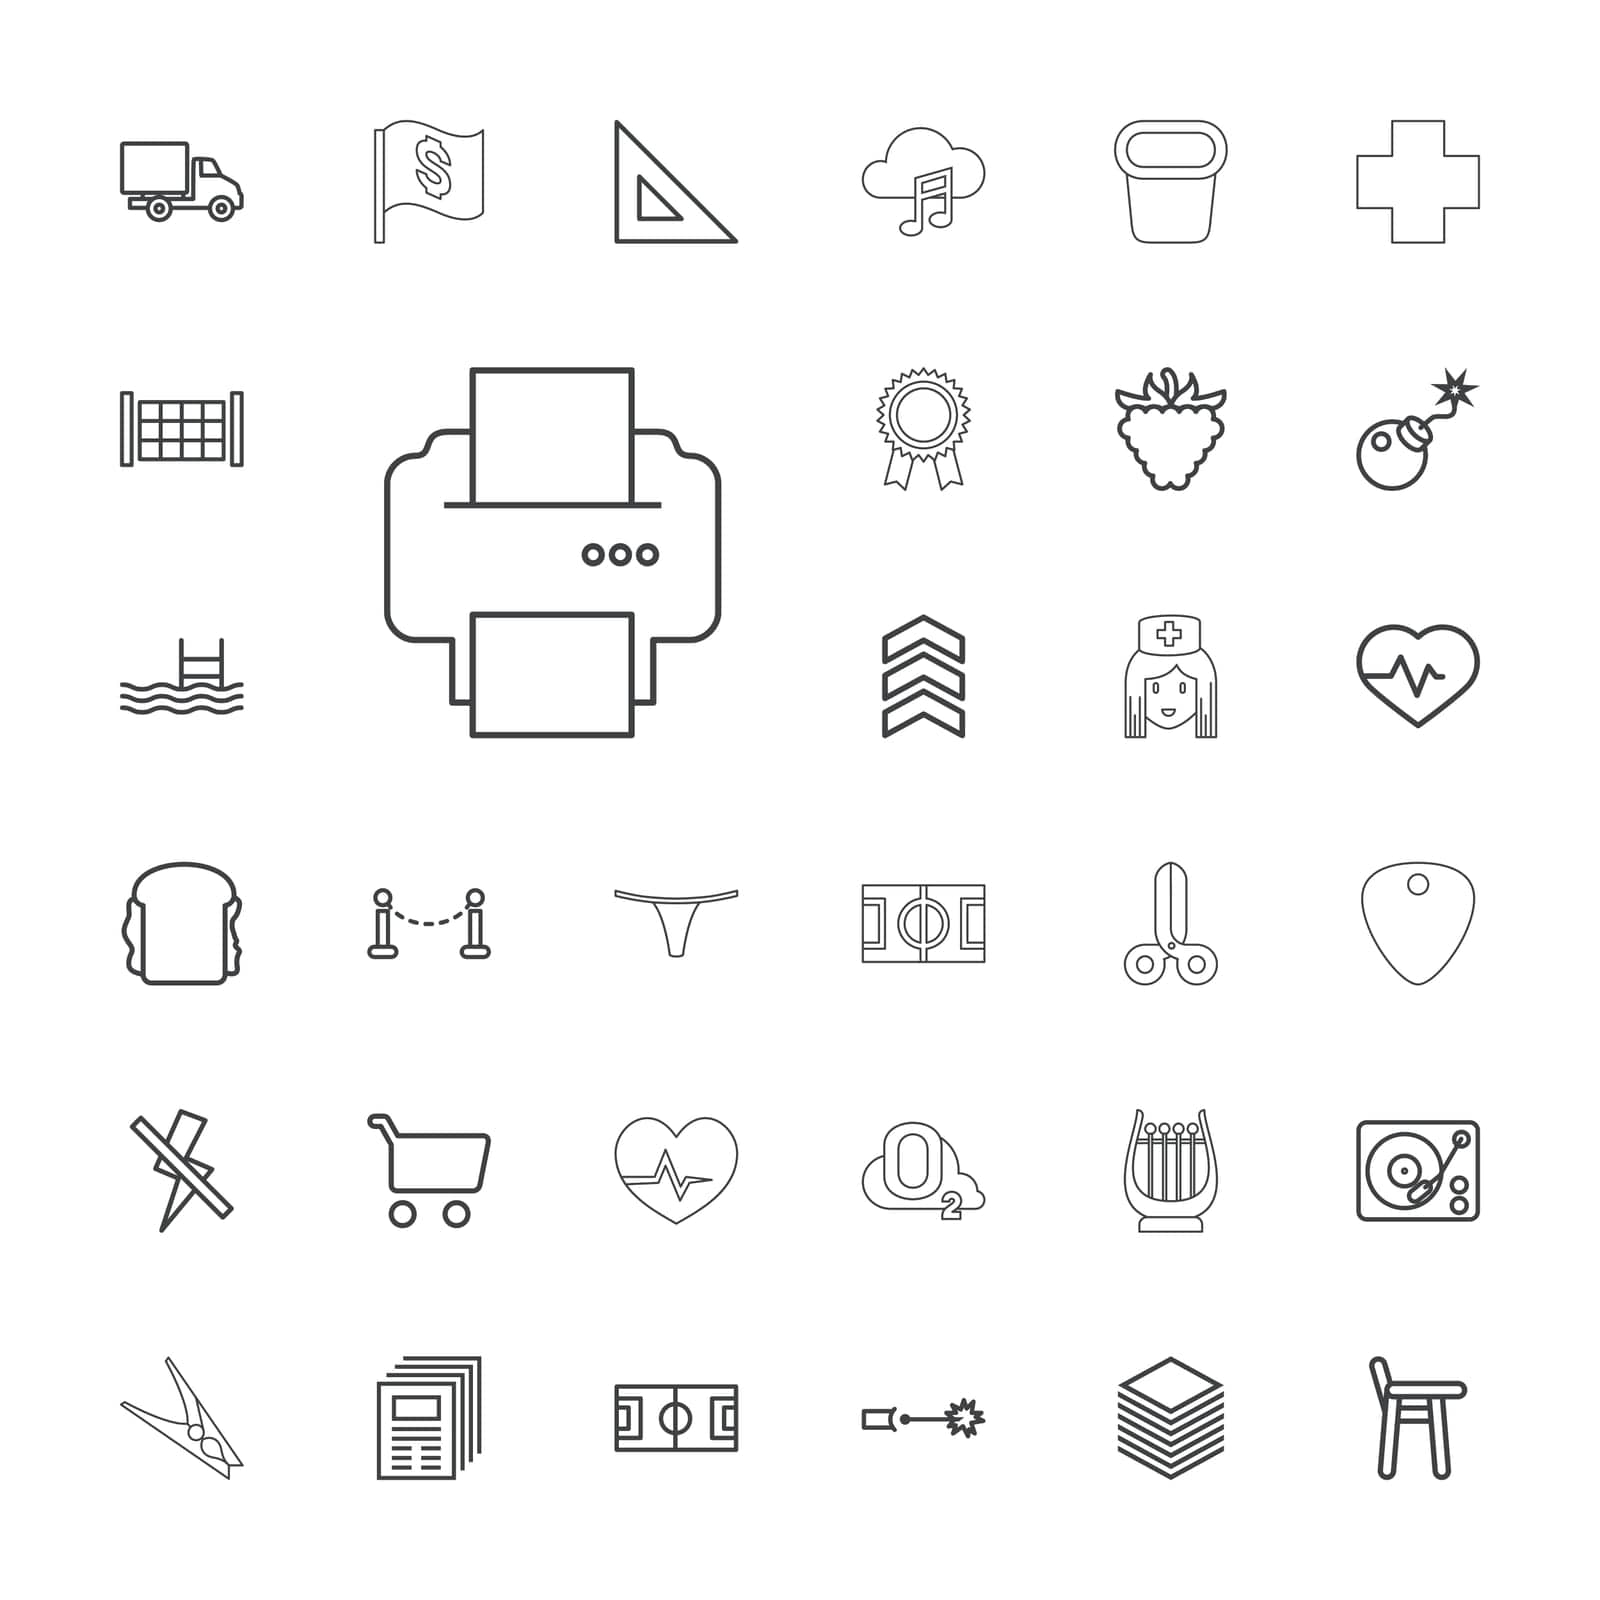 no,medical,flag,arrow,heartbeat,line,harp,icon,for,ruler,bomb,cart,dollar,cloud,gramophone,music,award,pot,car,plants,nurse,underwear,vector,pitch,female,oxygen,shopping,delivery,raspberry,set,printer,cross,pool,sandwich,football,guitar,o,scissors,with,mediator,fence,cloth,flash by ogqcorp